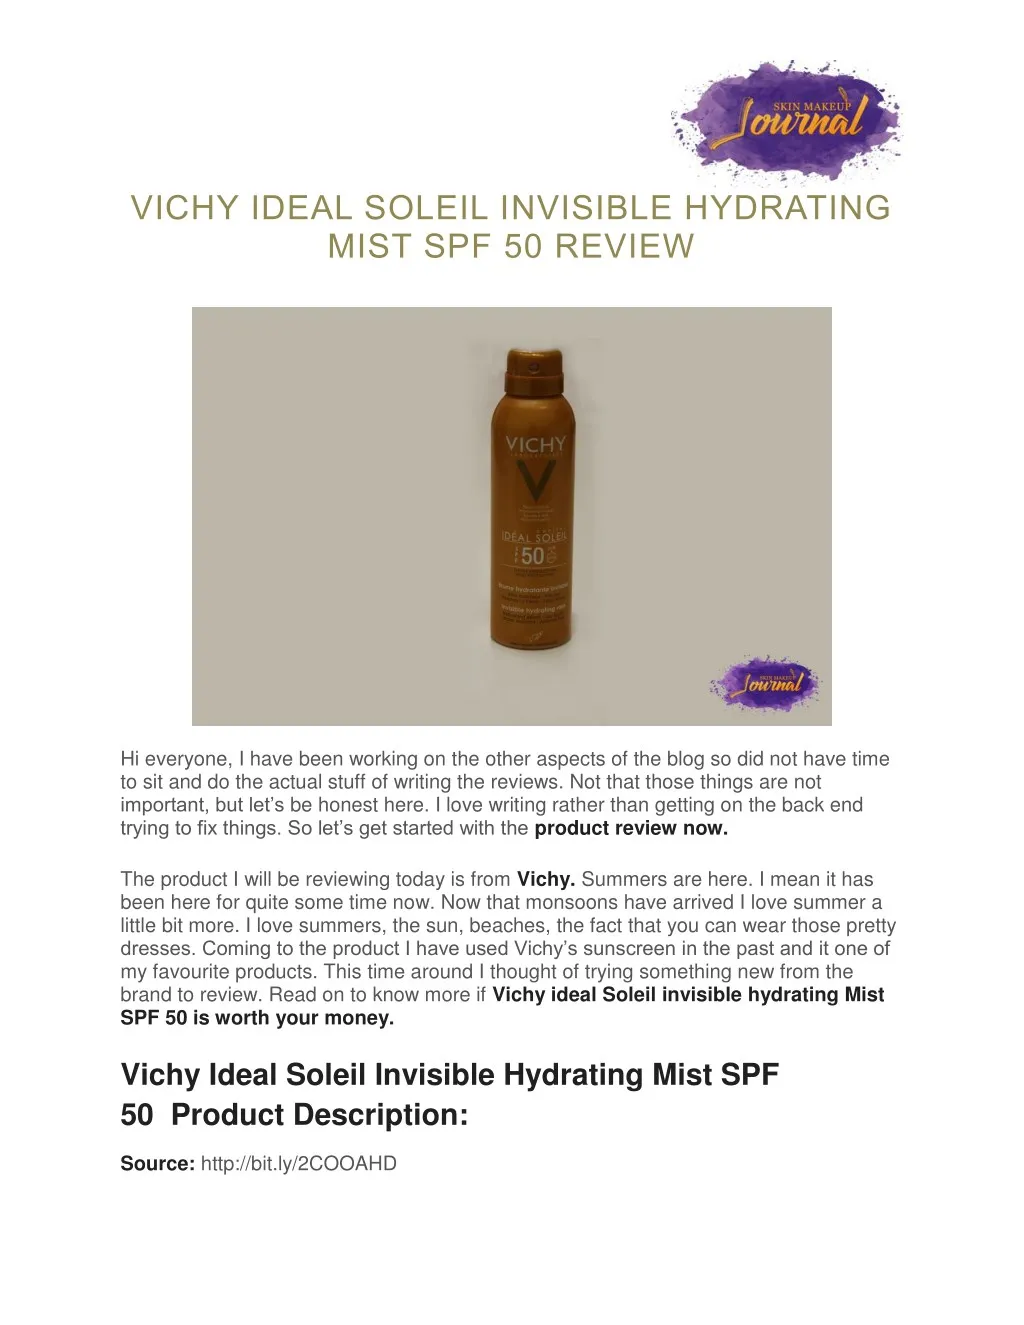 vichy ideal soleil invisible hydrating mist